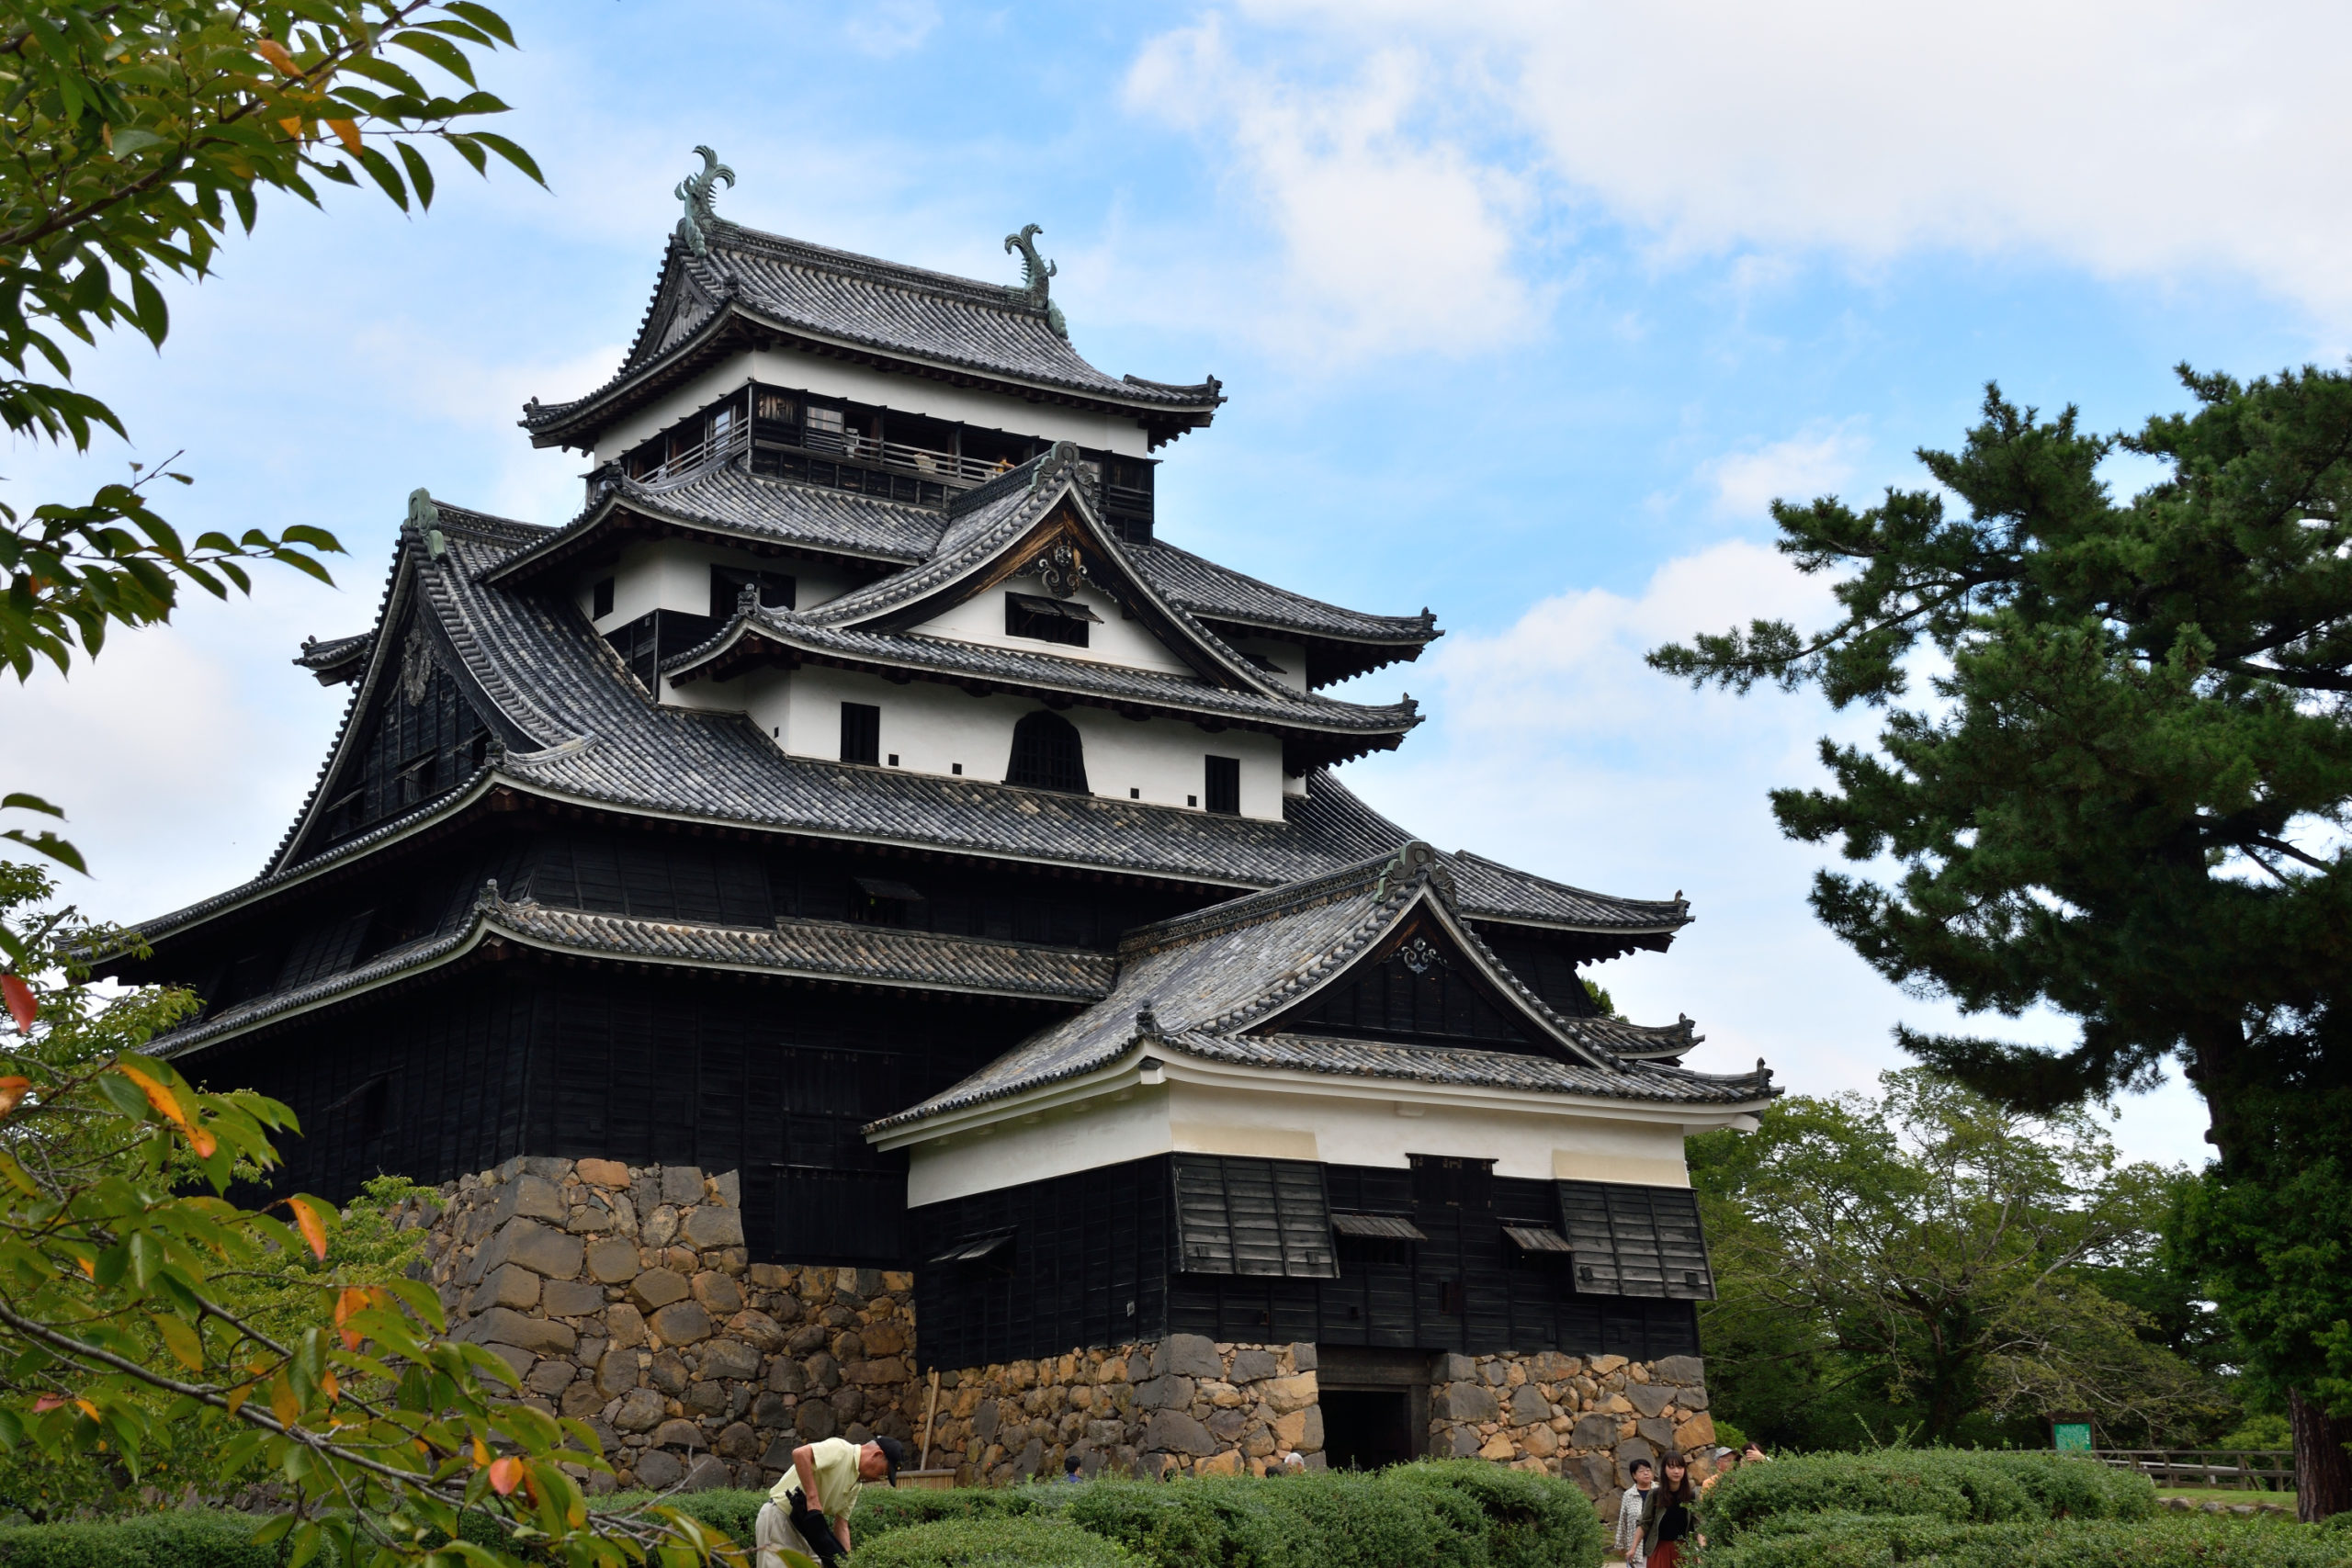 9 Best Things To Do in Matsue, Japan [with Suggested Tours]